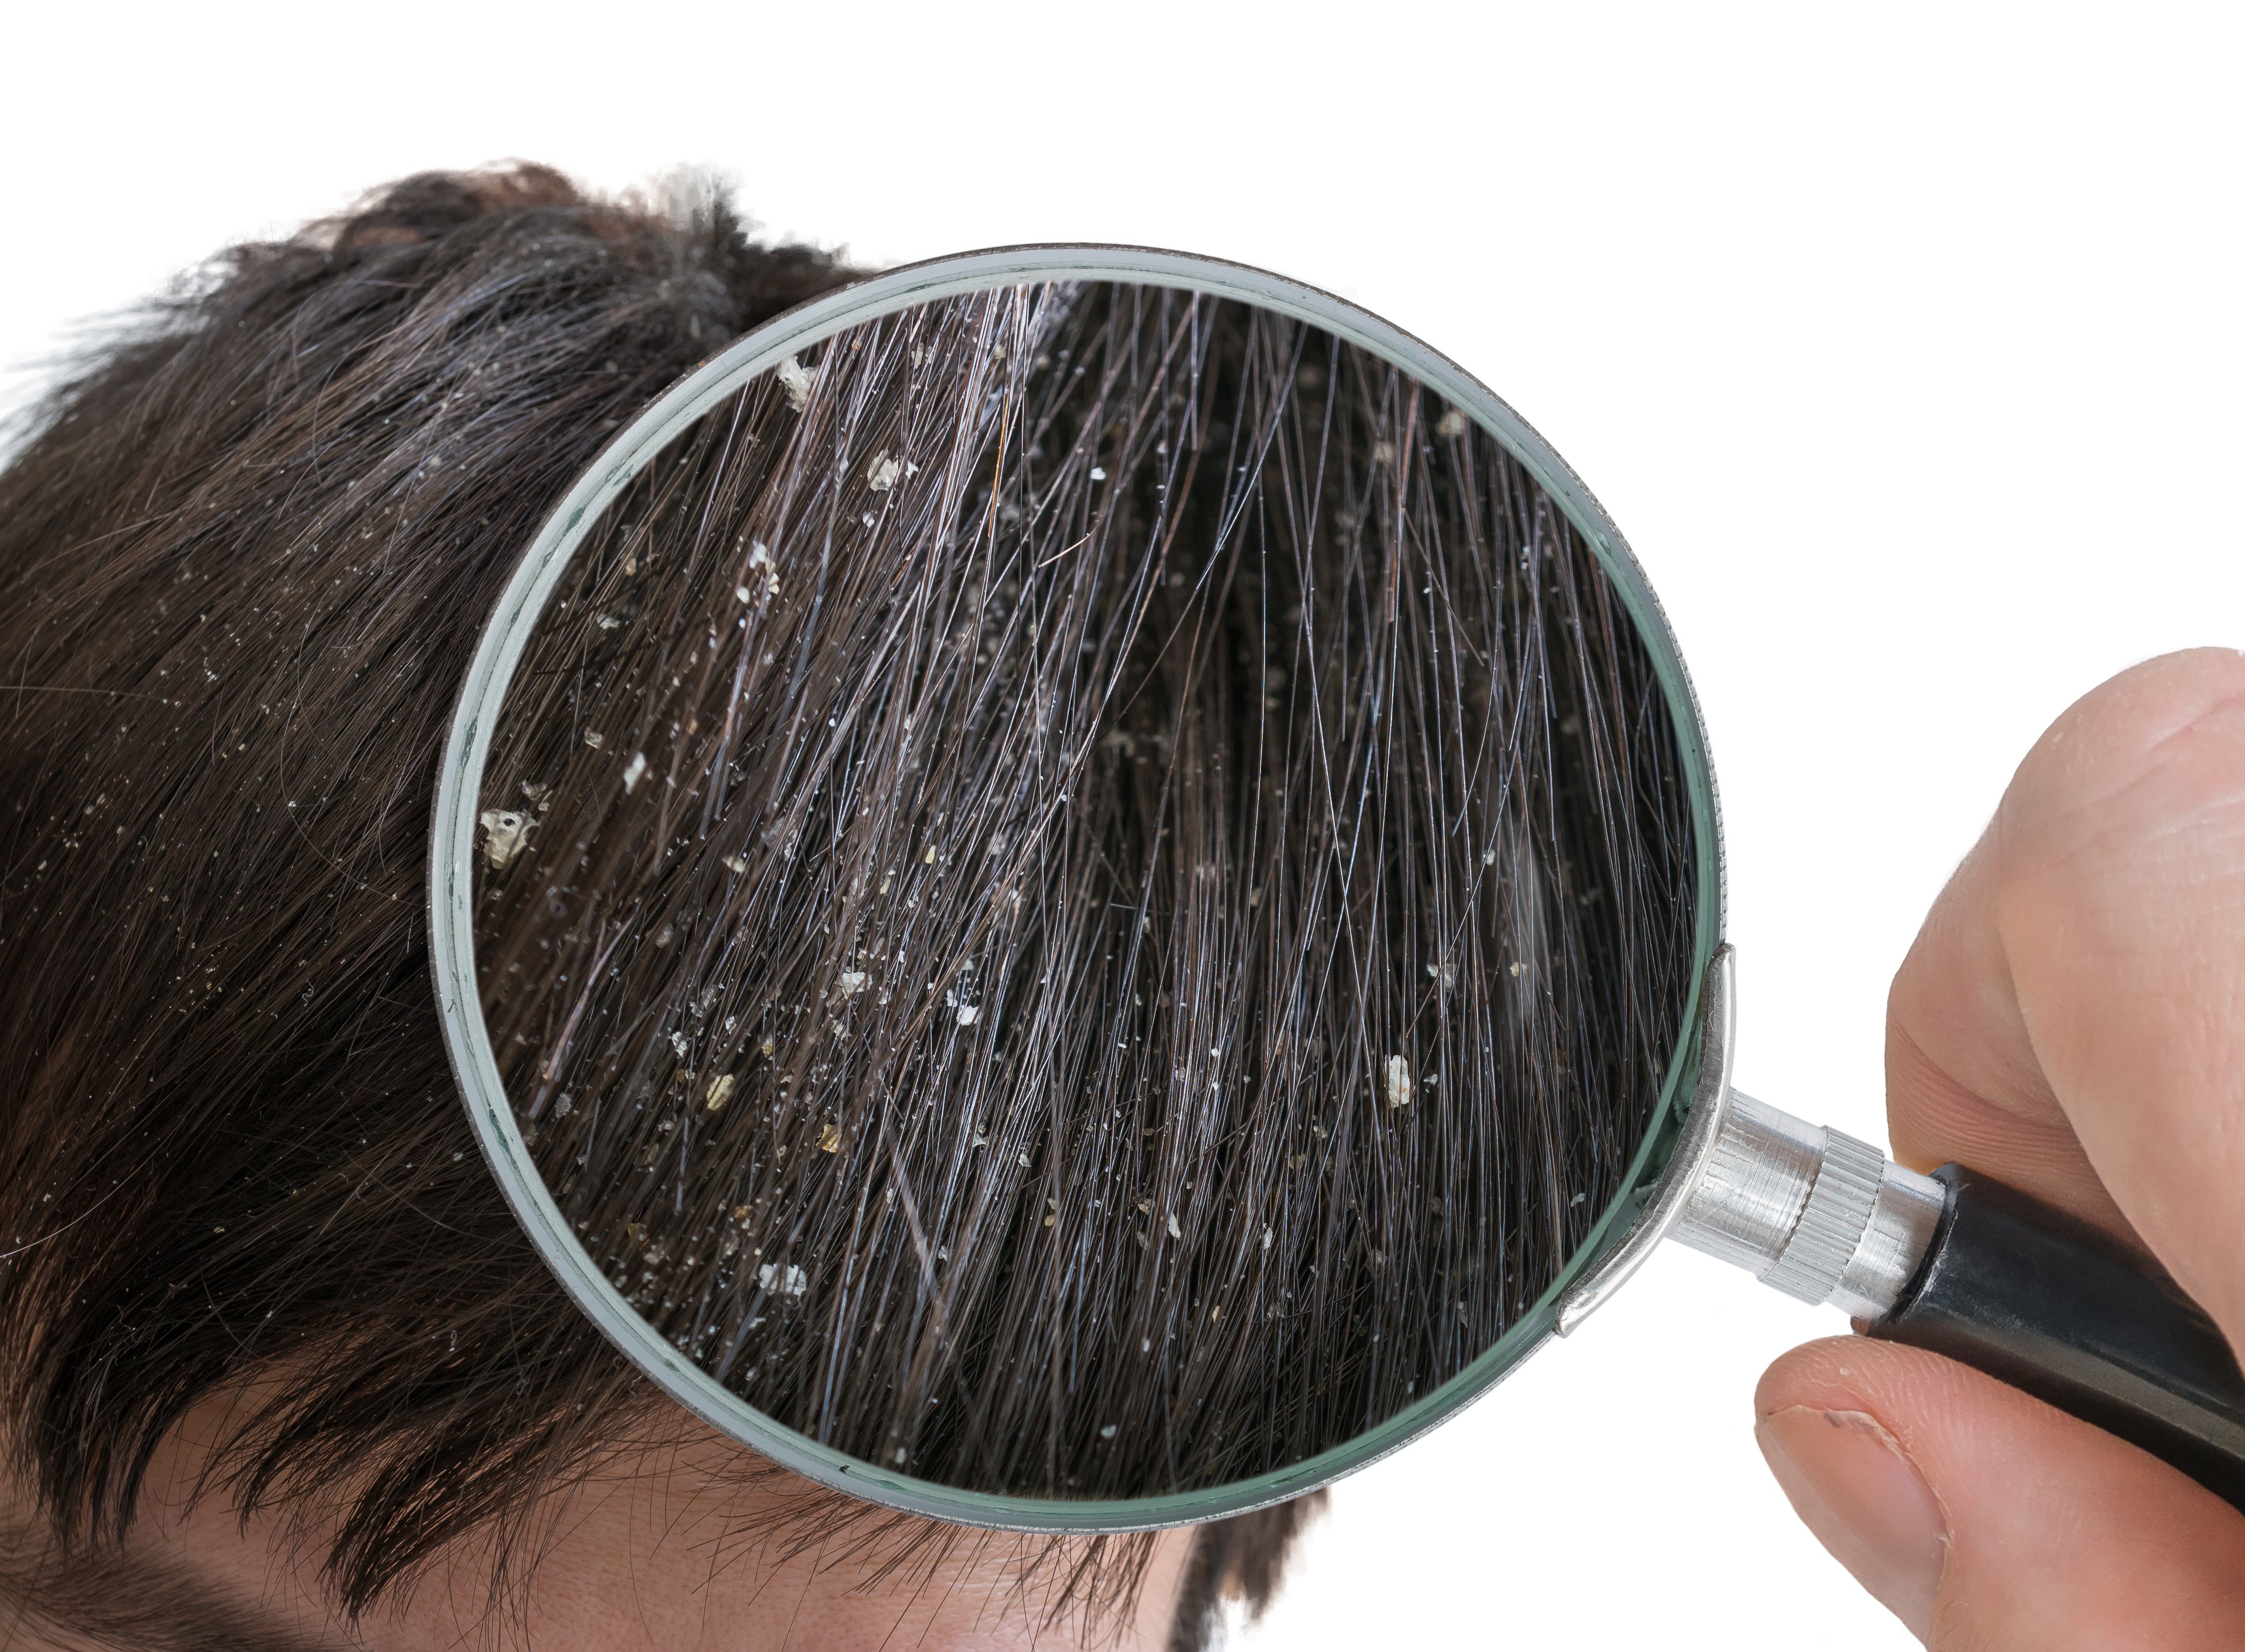 A close look at dandruff flakes in the hair | Source: Getty Images